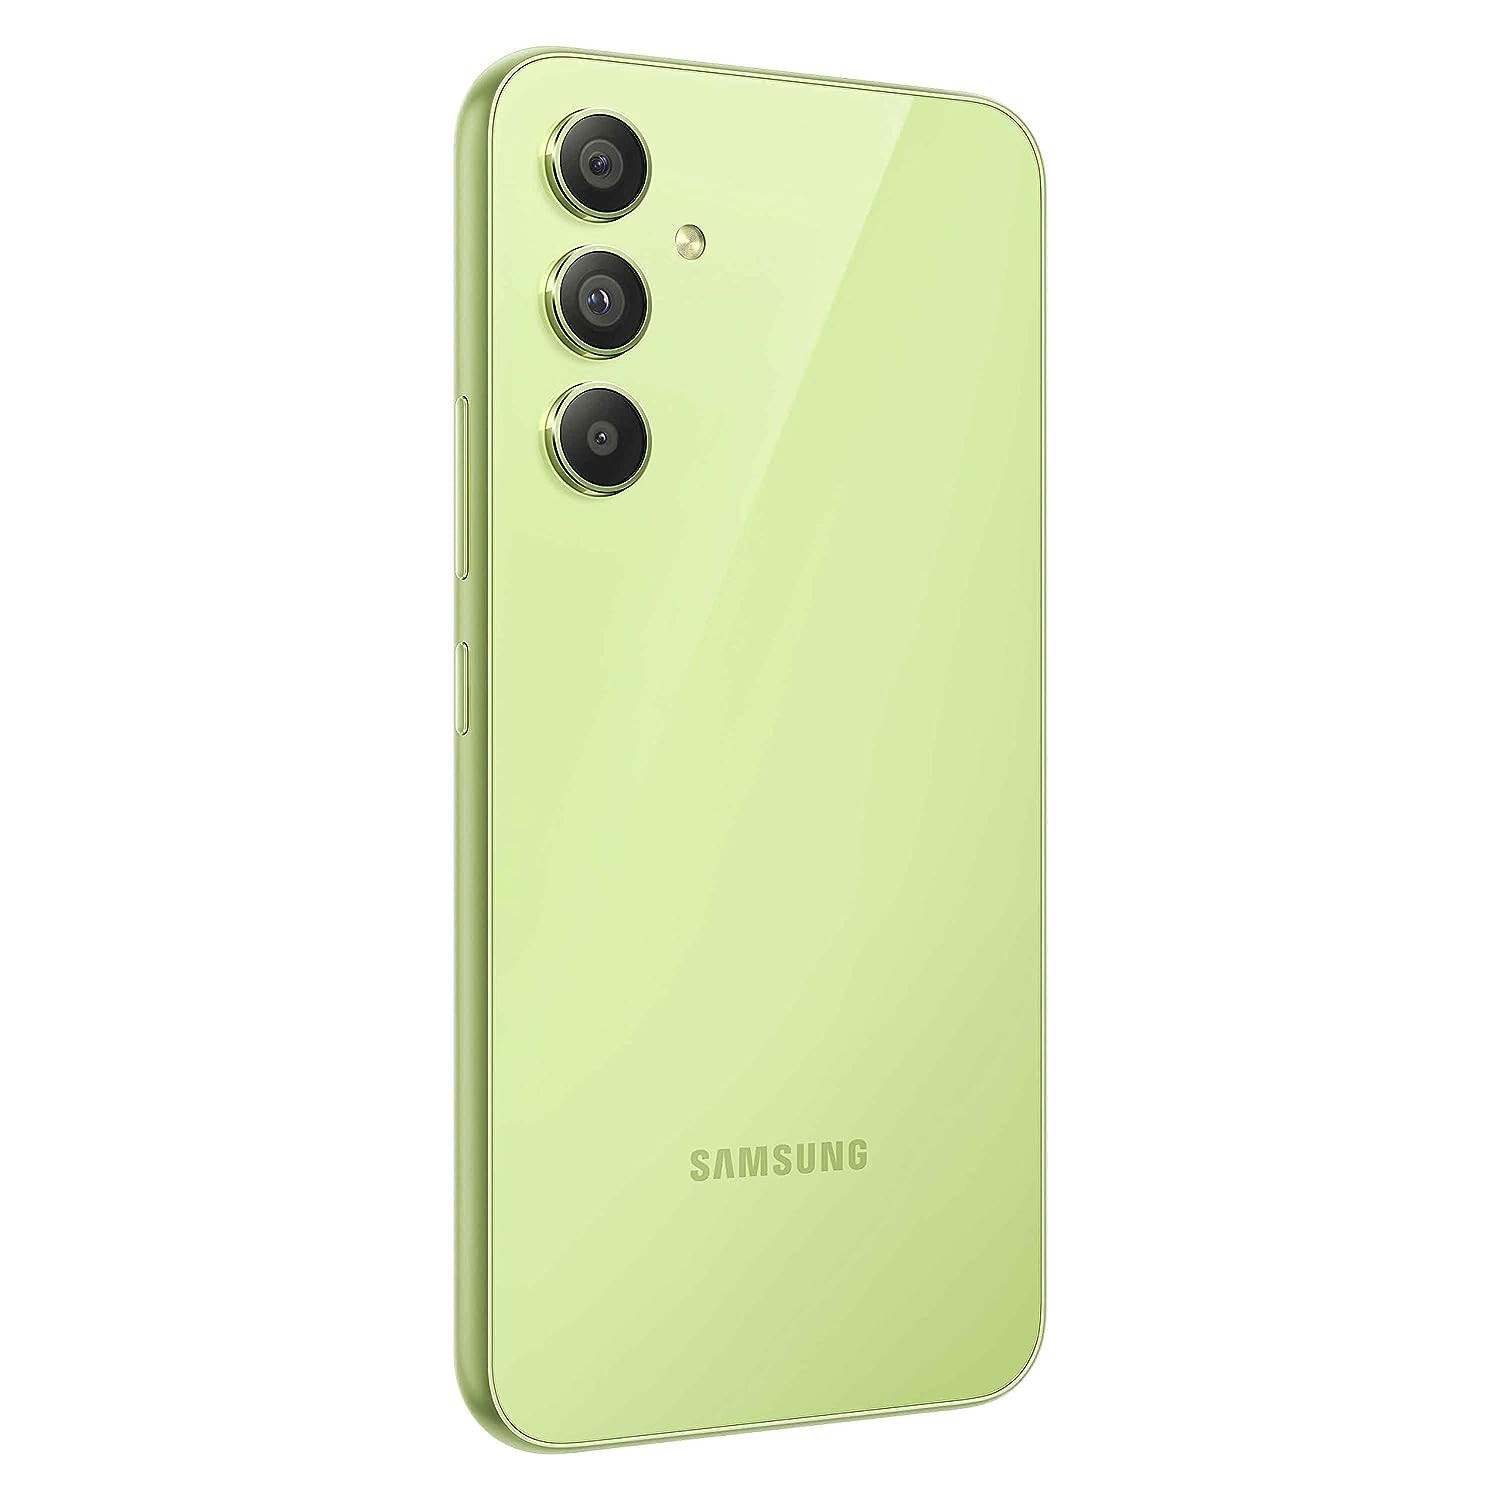 Samsung Galaxy A54 5G (Awesome Lime, 8GB, 128GB Storage) Without Offer